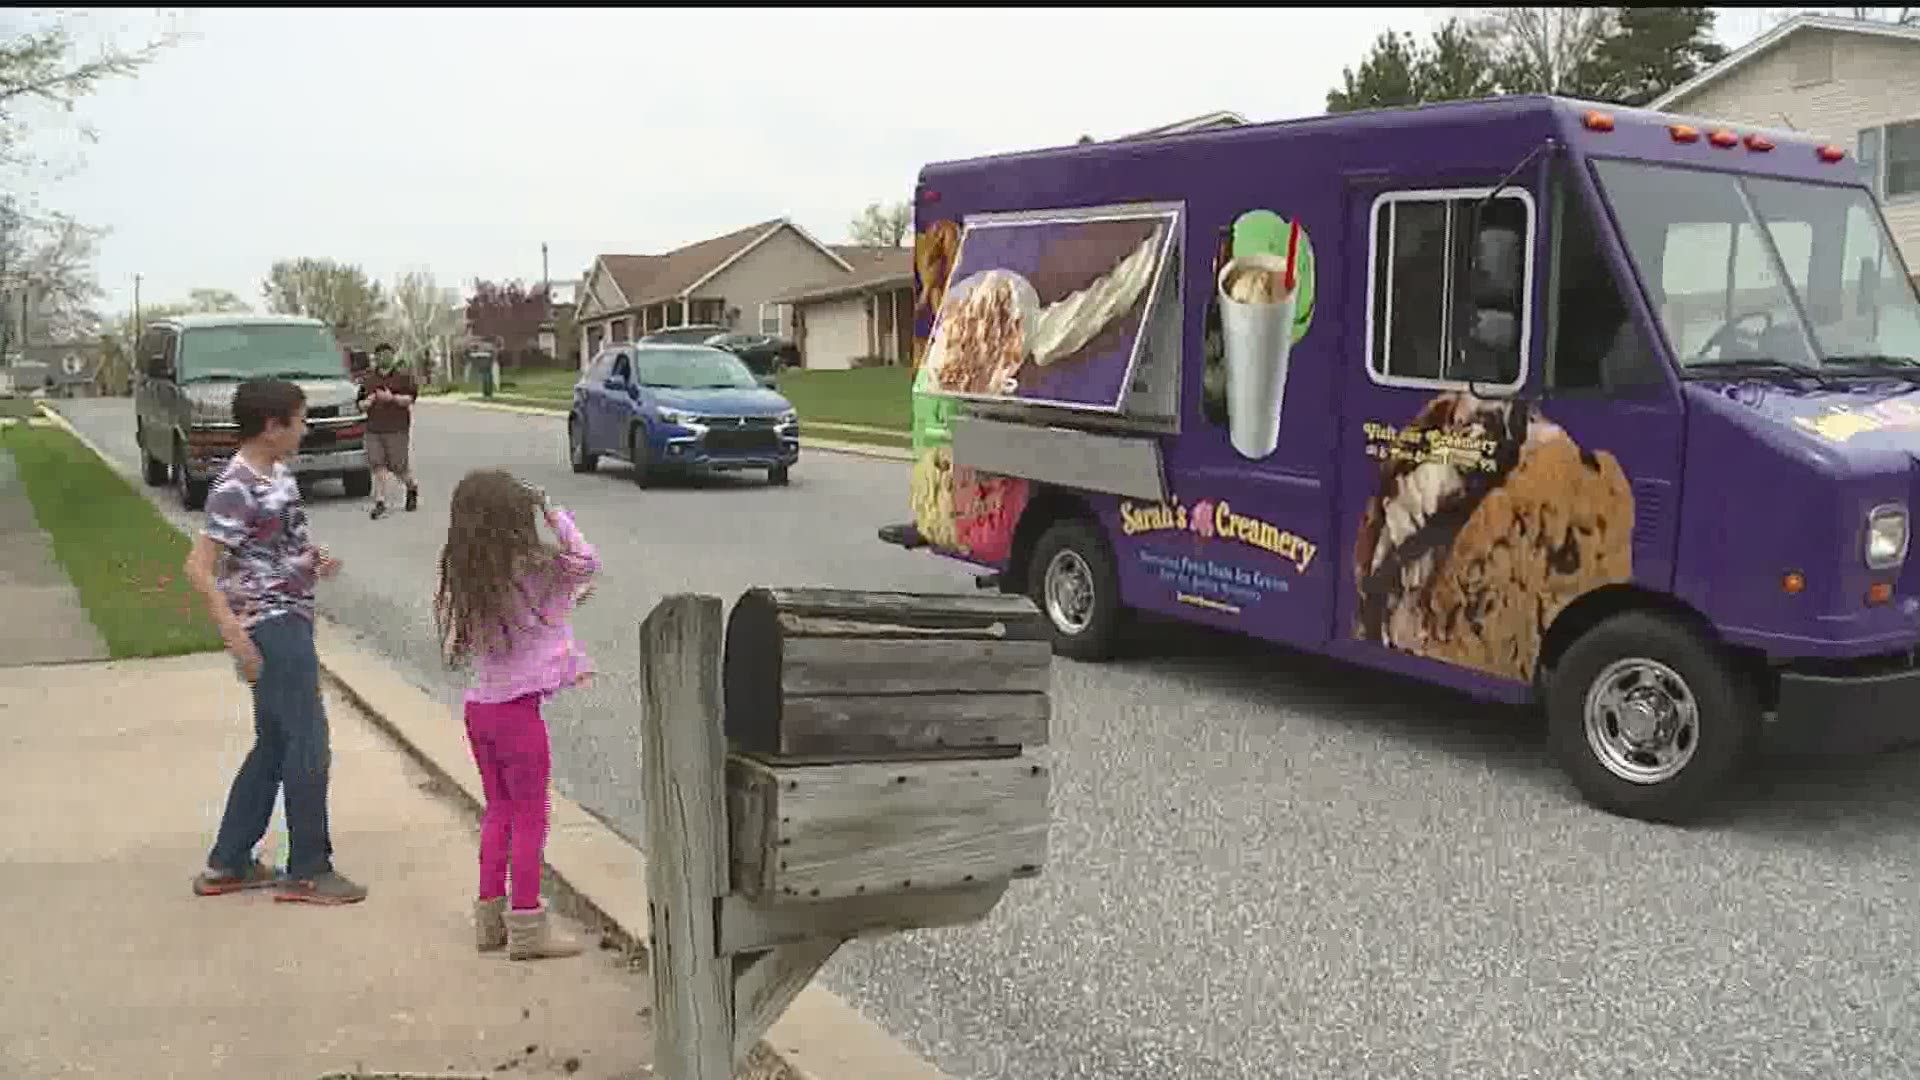 From ice cream to pasta, businesses are using food trucks to help reach more customers while also making safety changes inside the vehicles to protect employees.